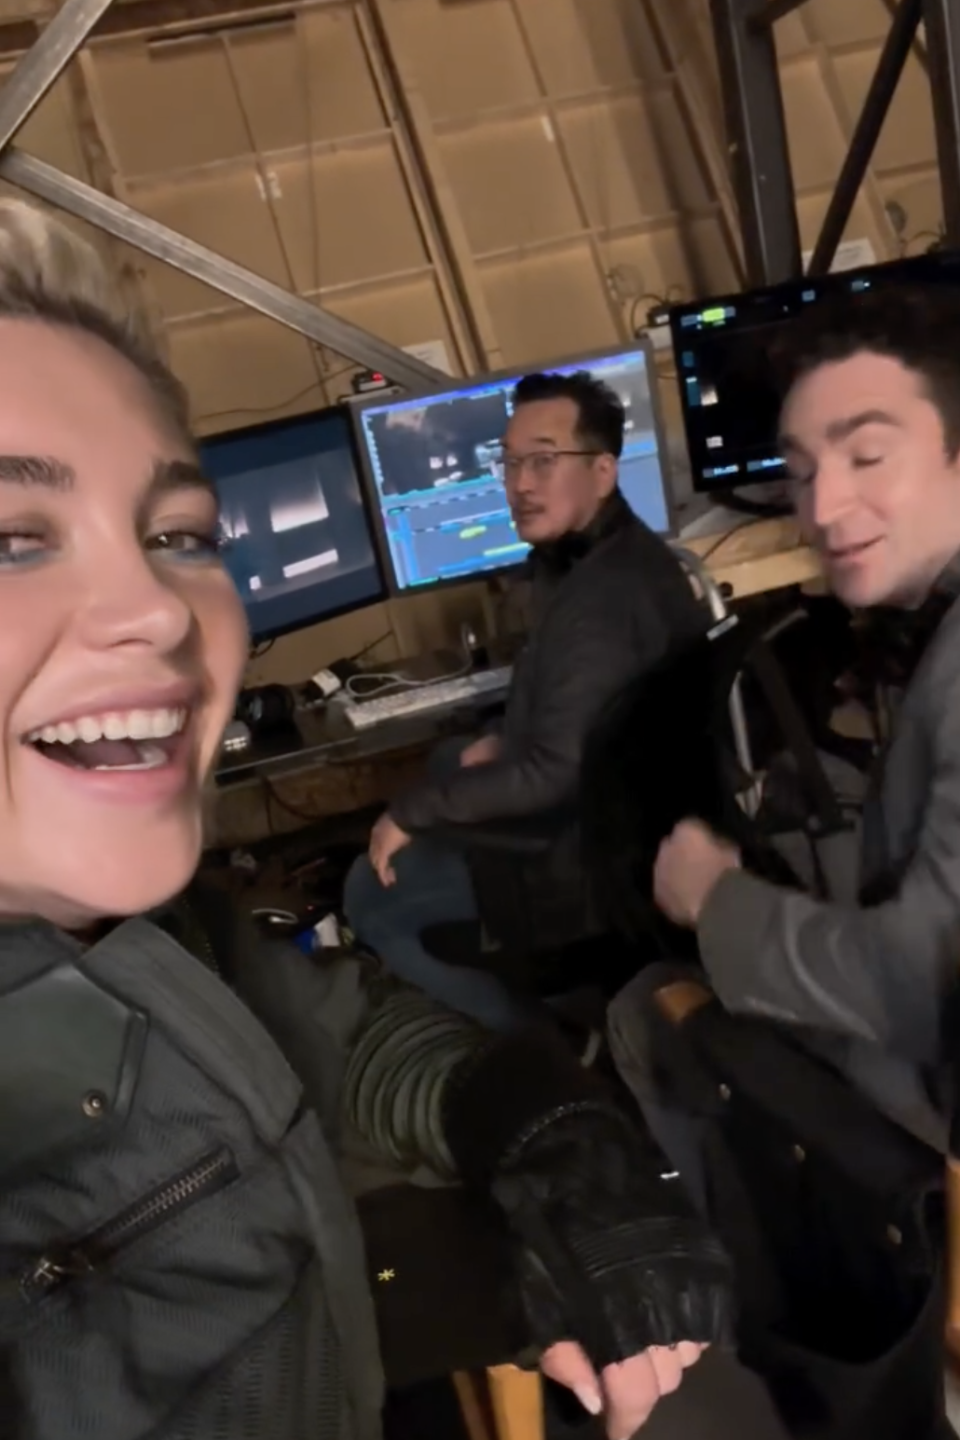 Florence Pugh with posing with monitors and equipment in the background